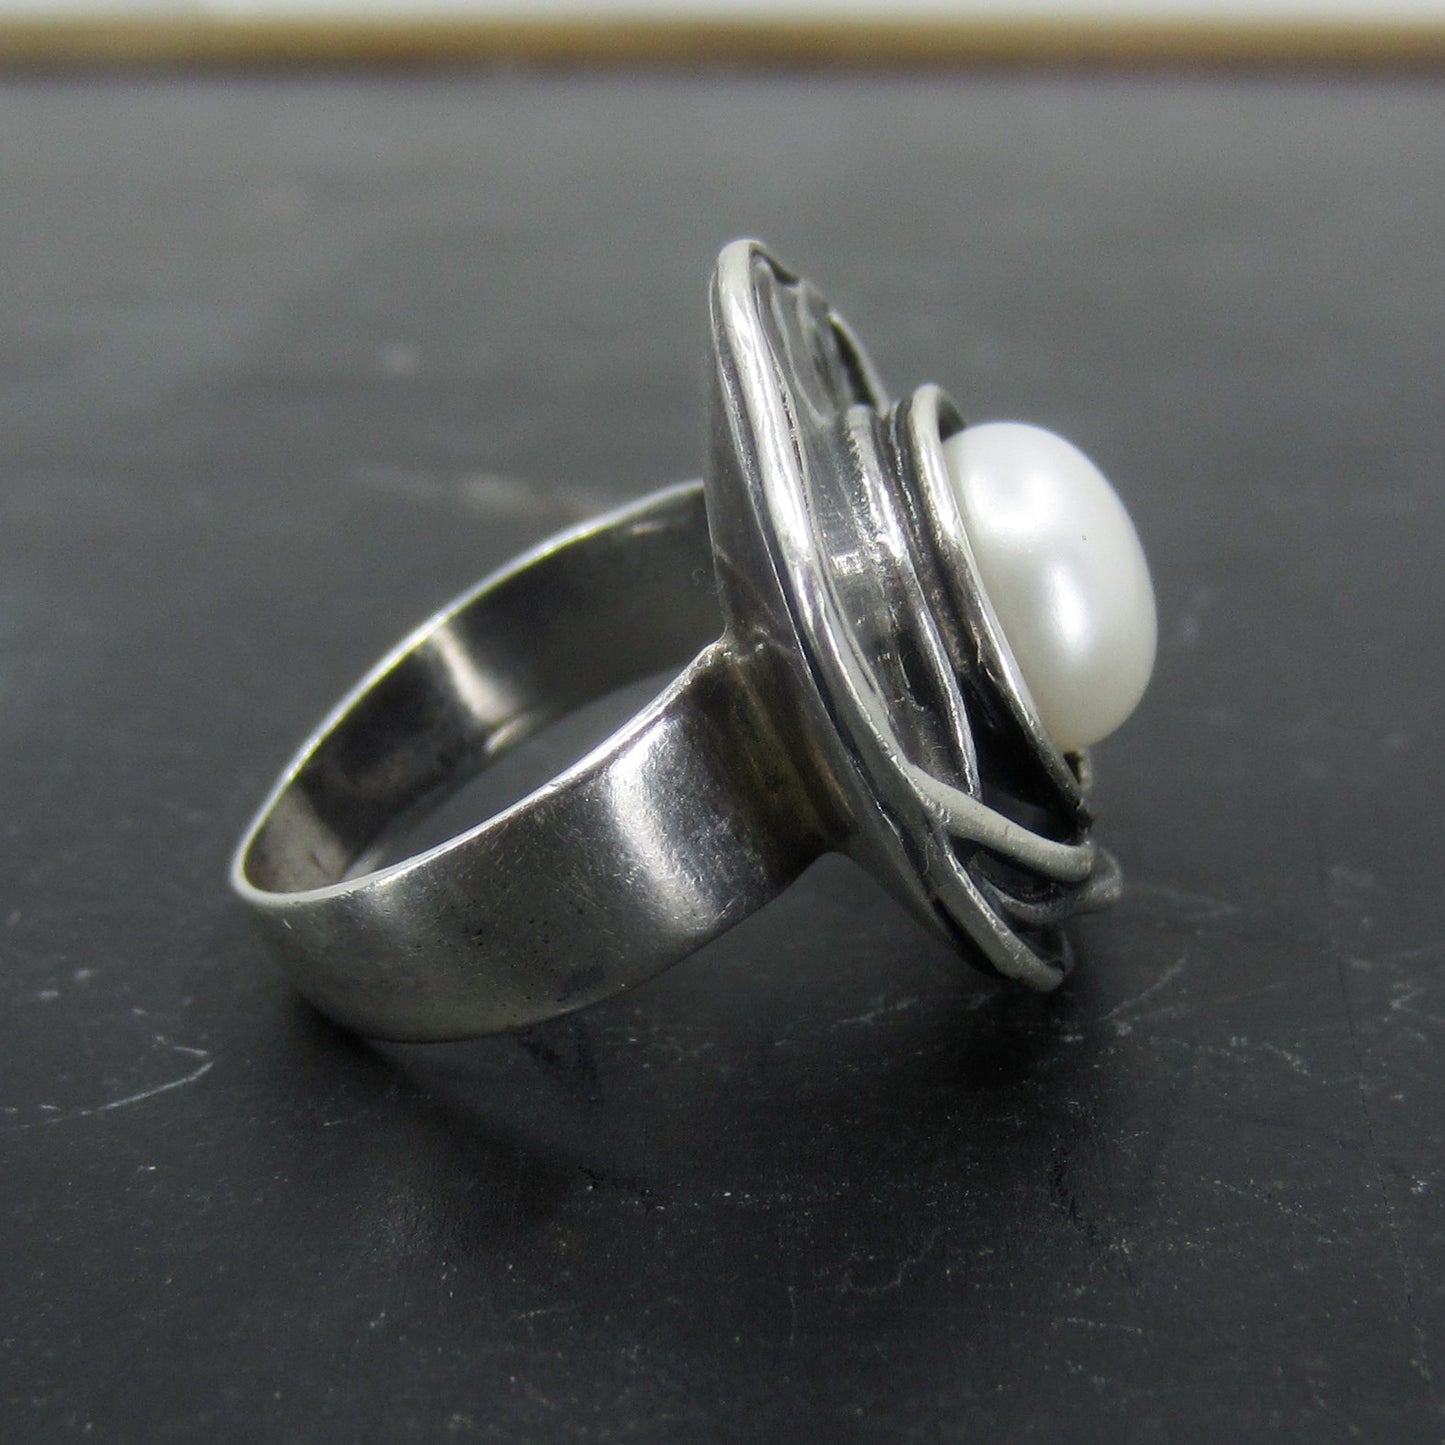 SOLD--Modernist Pearl Ring Sterling Silver c. 1970